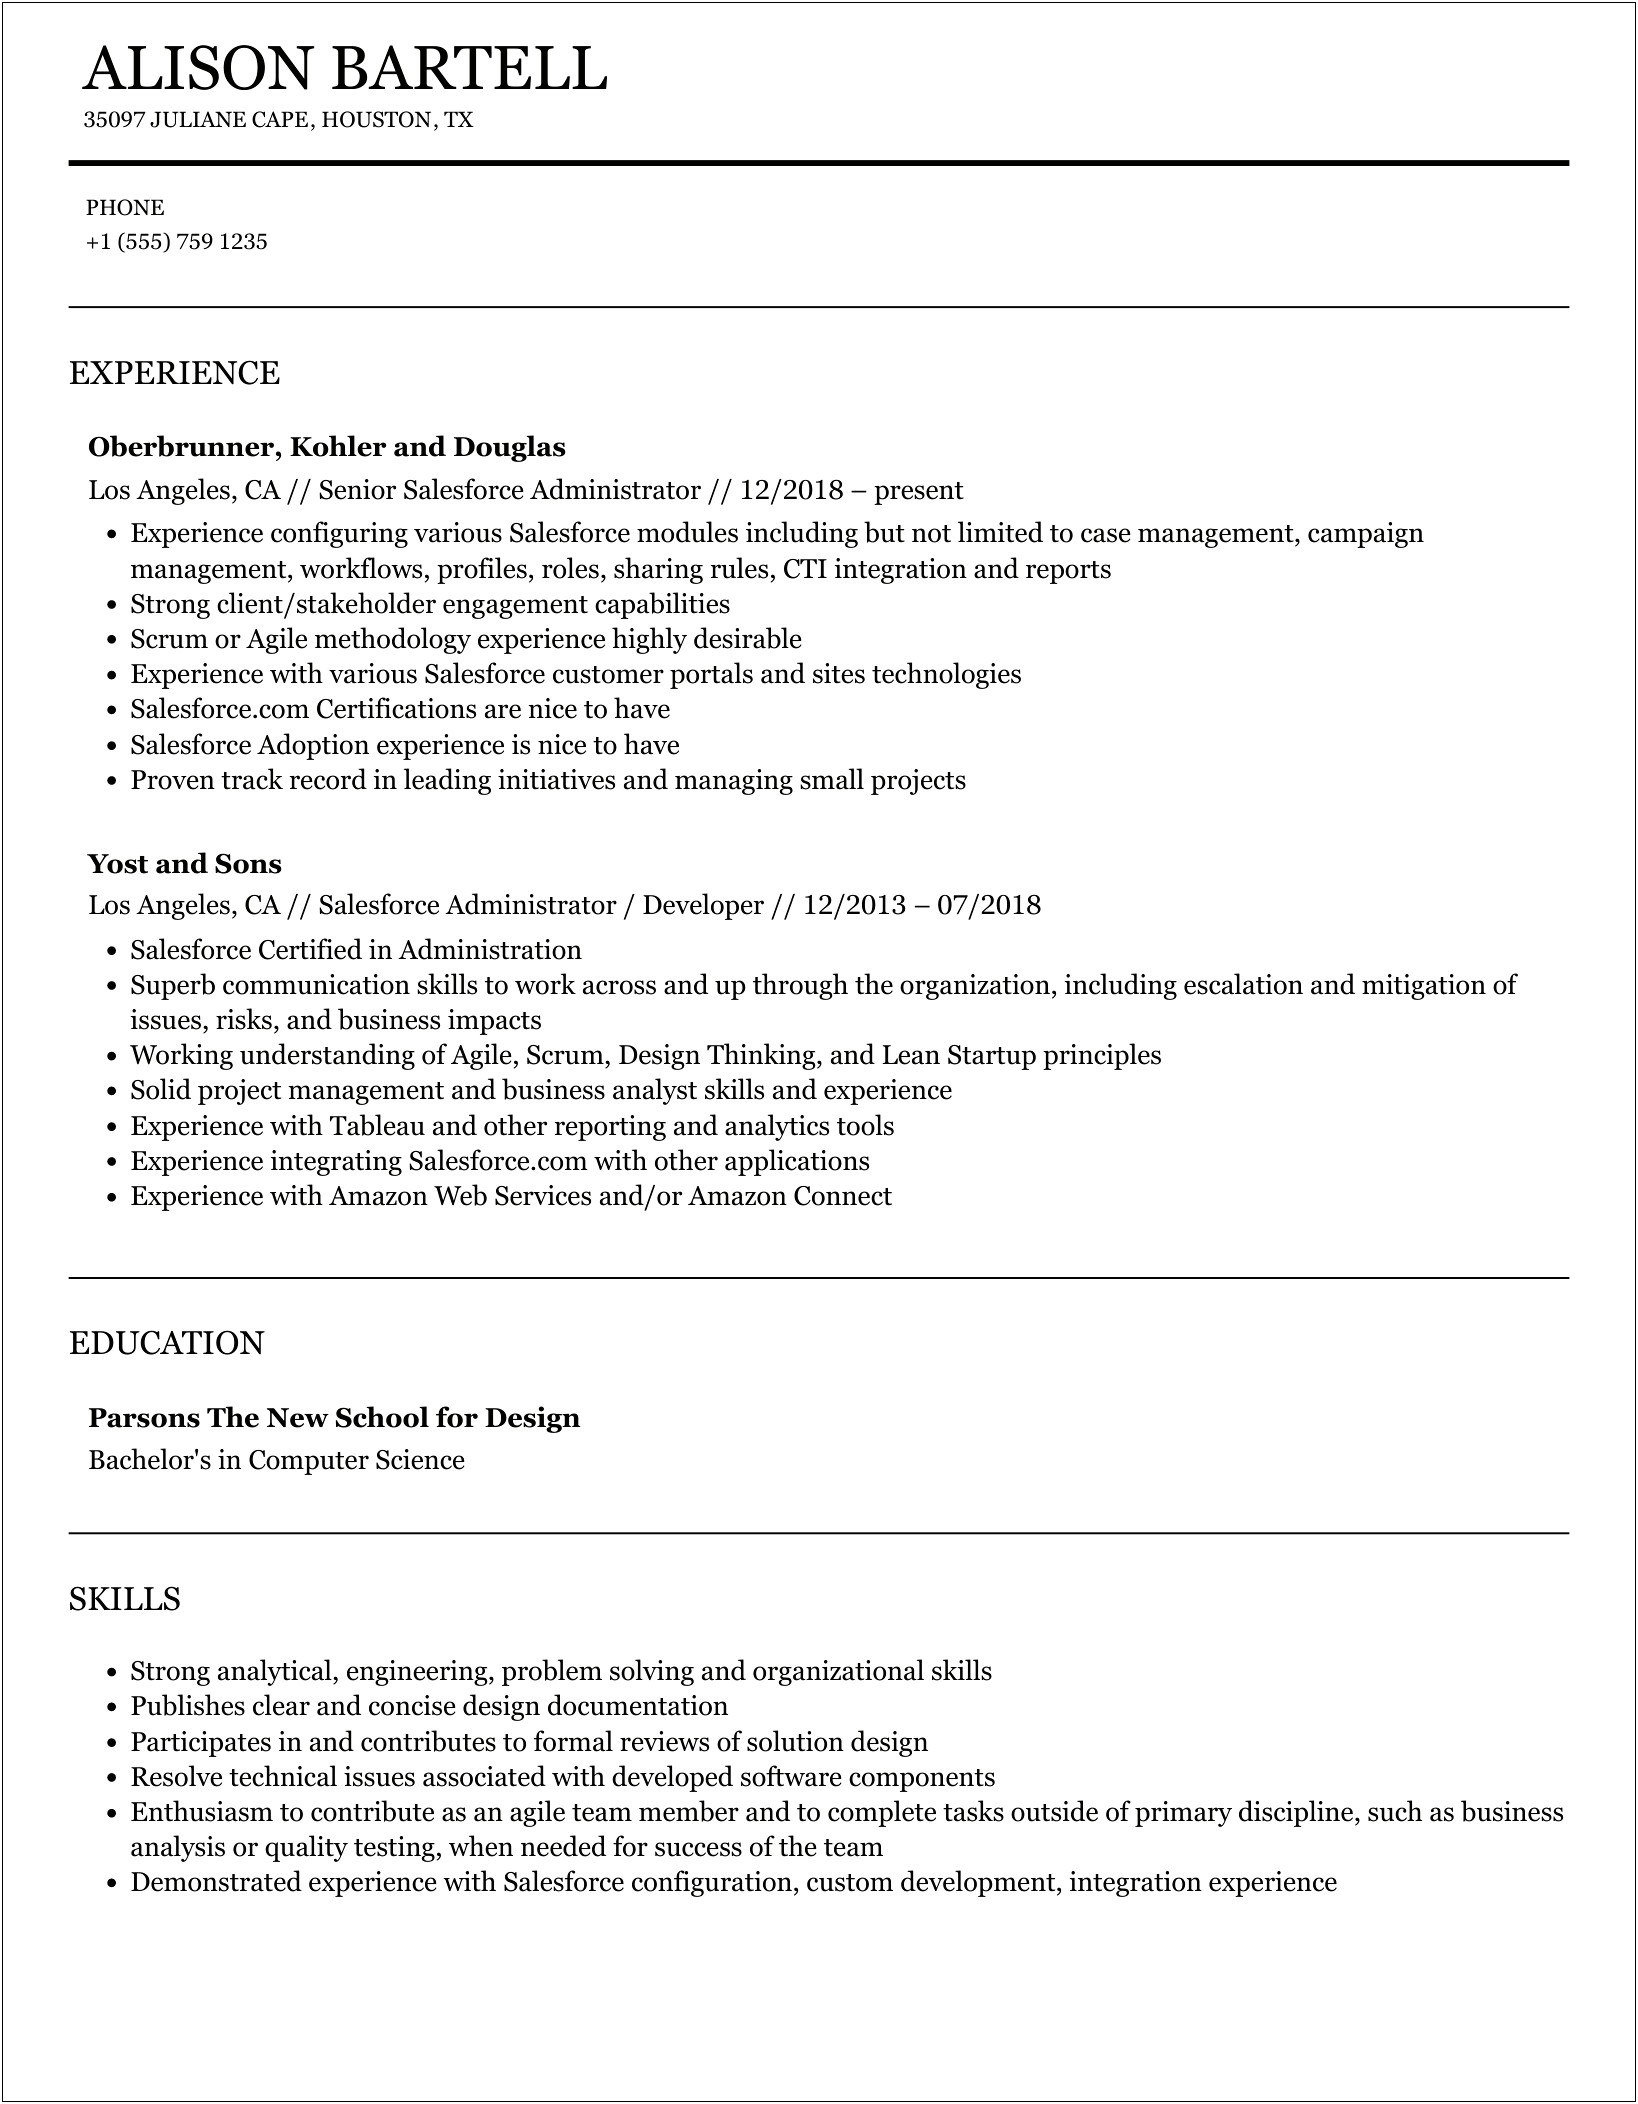 Salesforce Admin In College Experience Resume